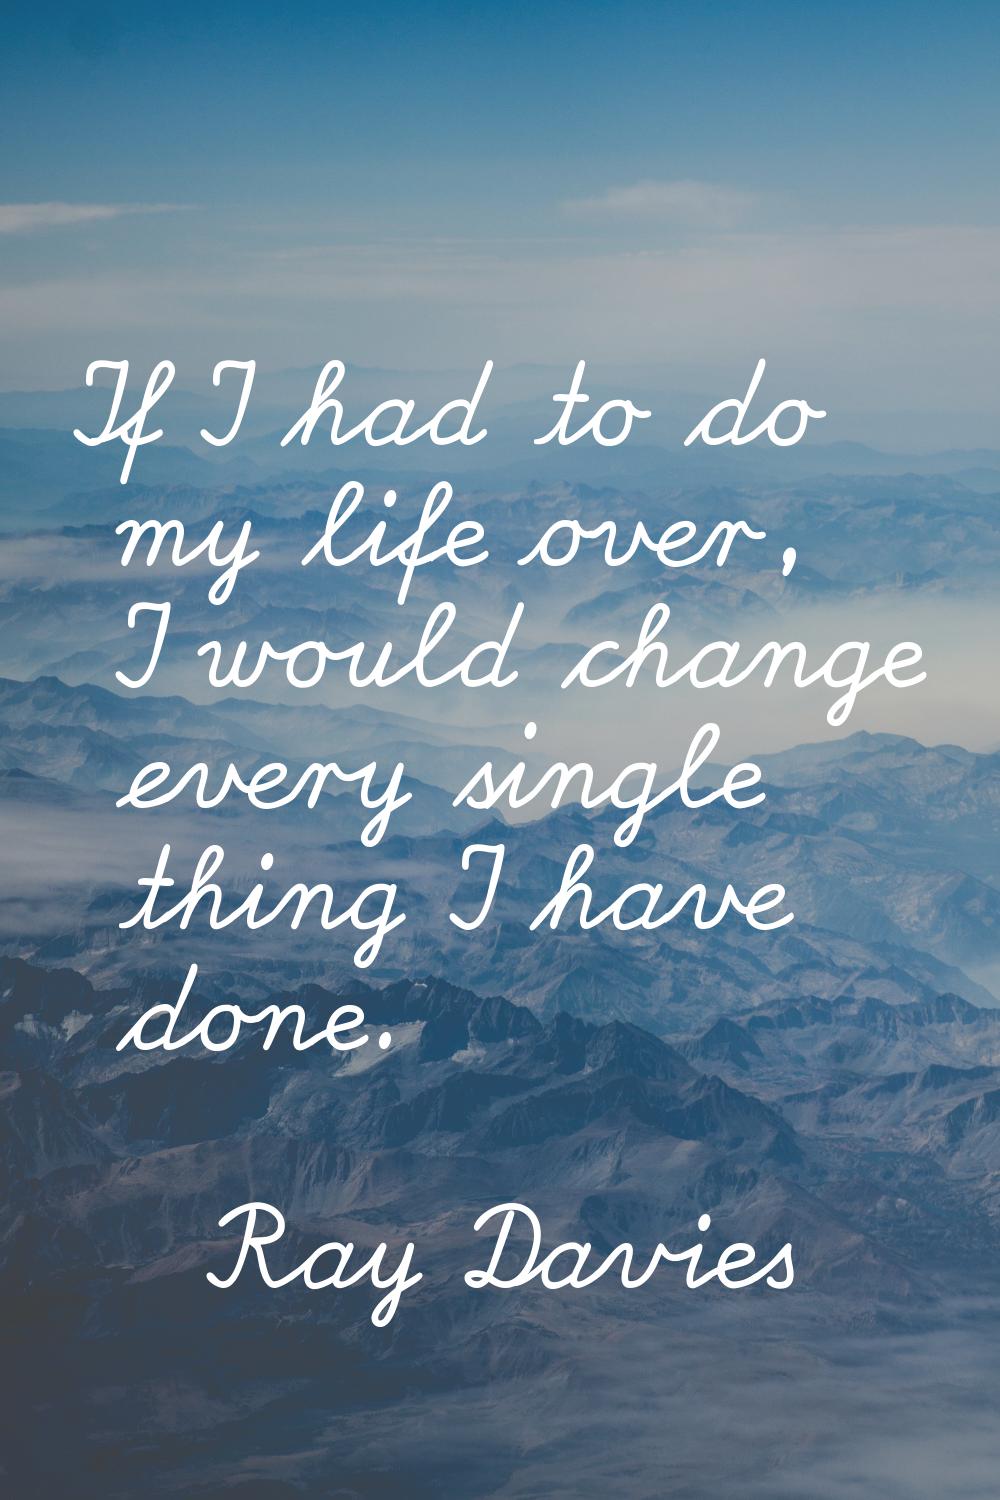 If I had to do my life over, I would change every single thing I have done.